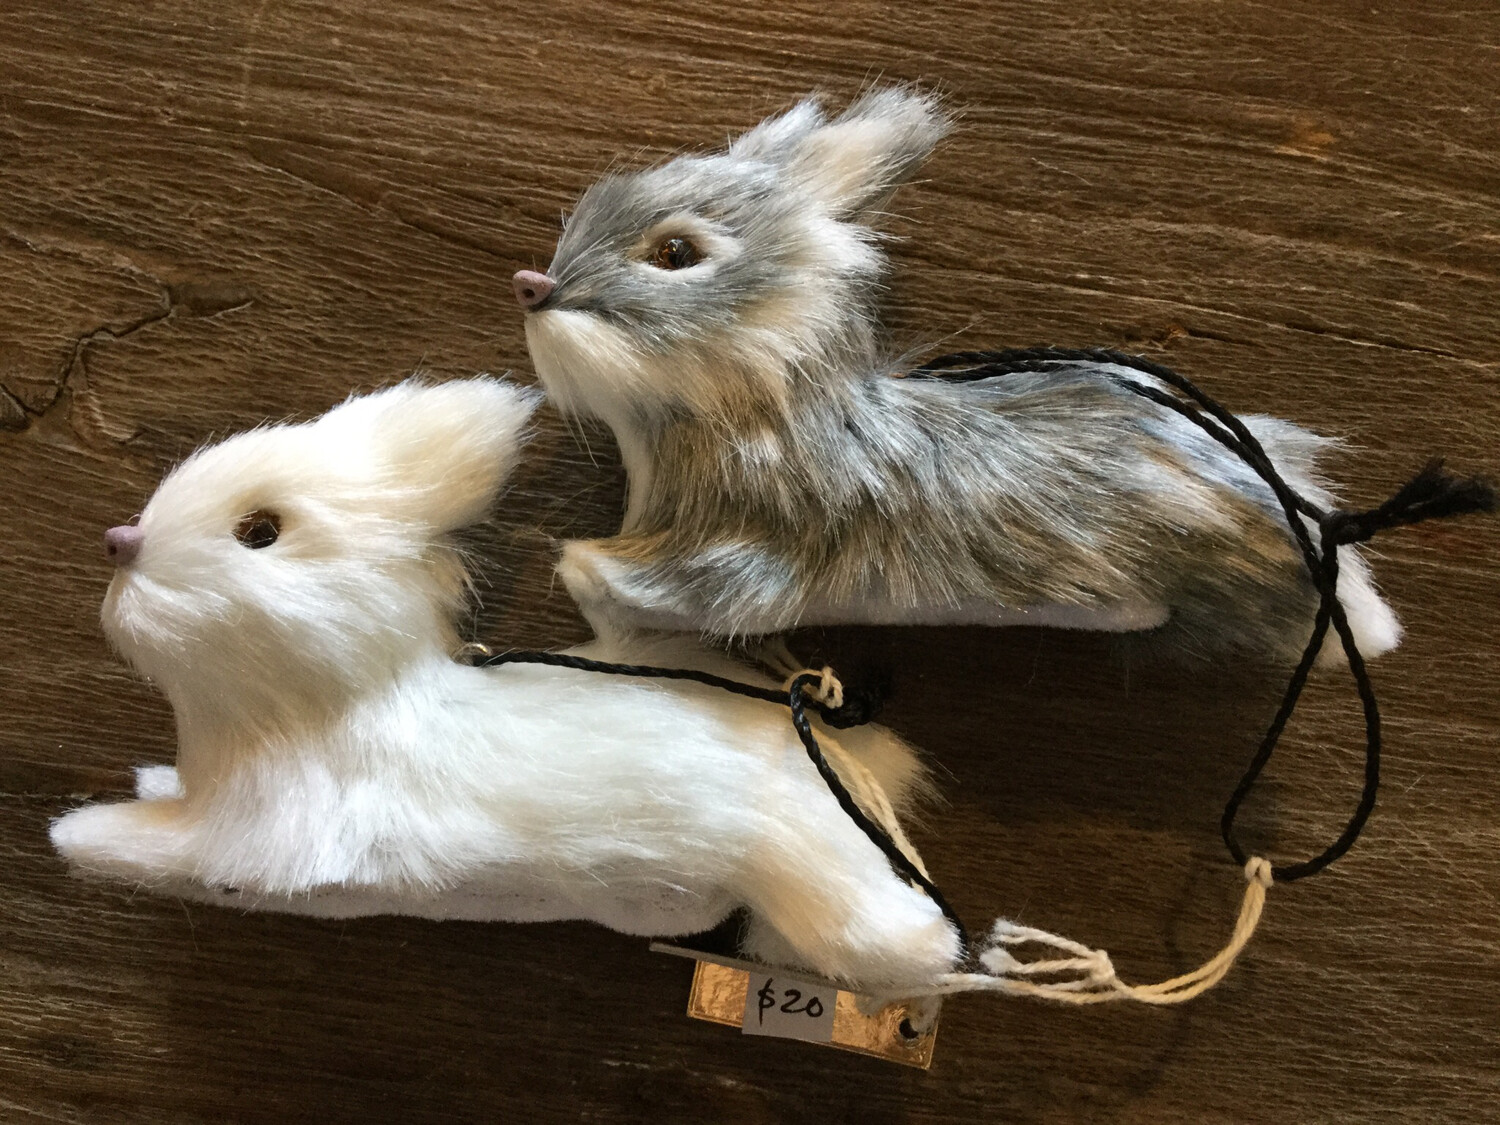 Down To The Woods Rabbits Small Grey or White With & Without Hangers